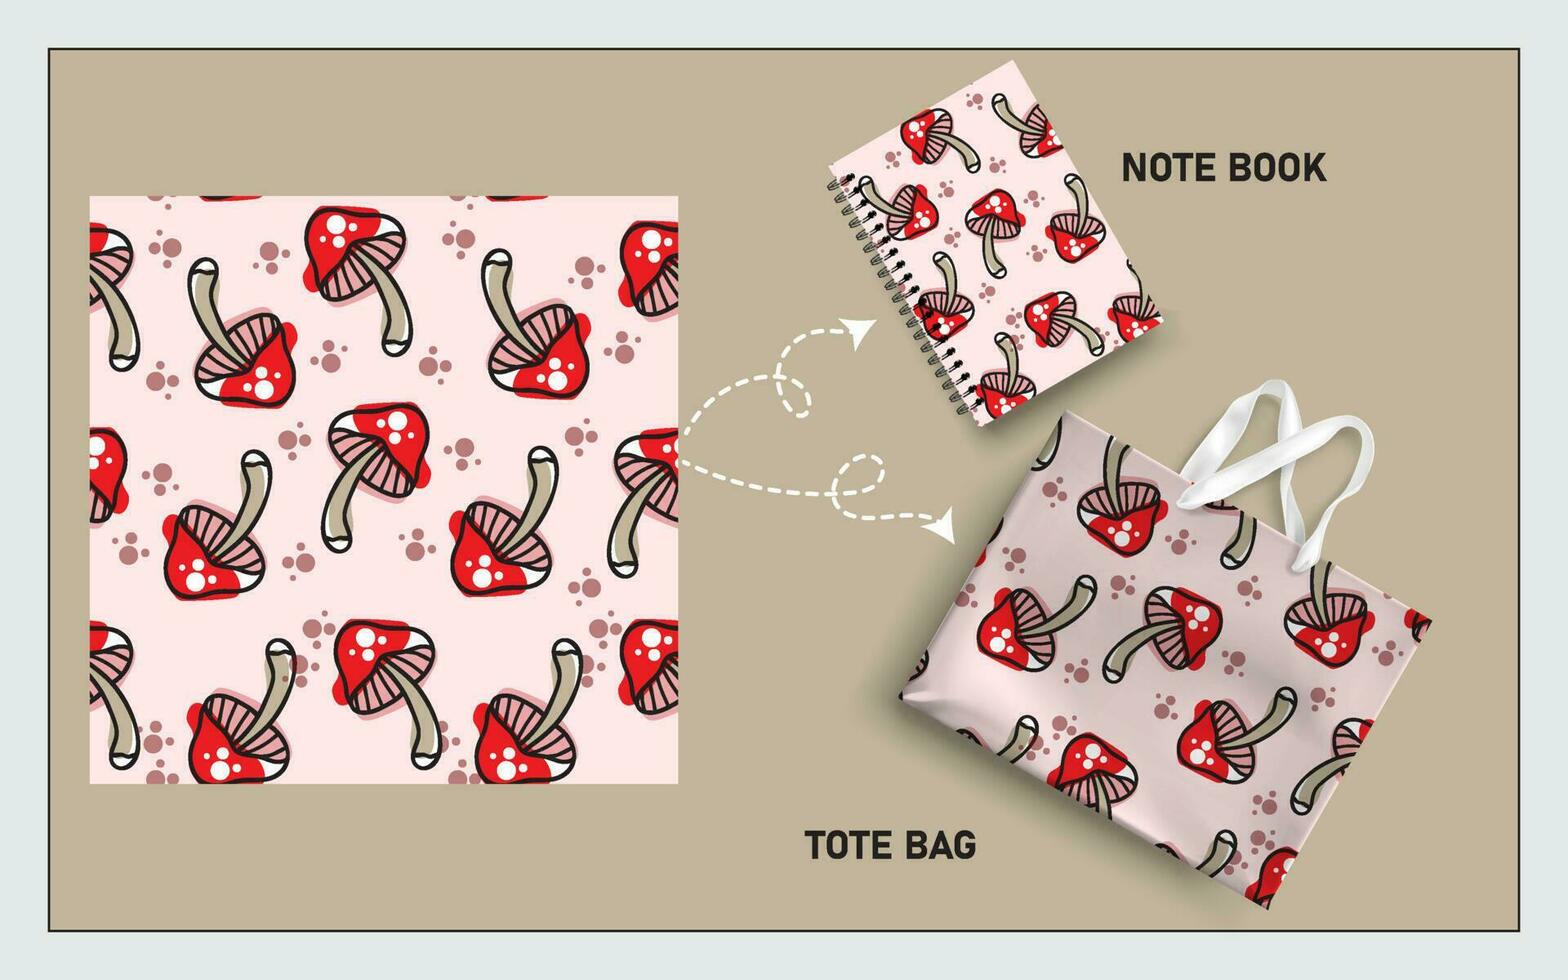 mockup tote bag and note book with mushroom vector seamless pattern.